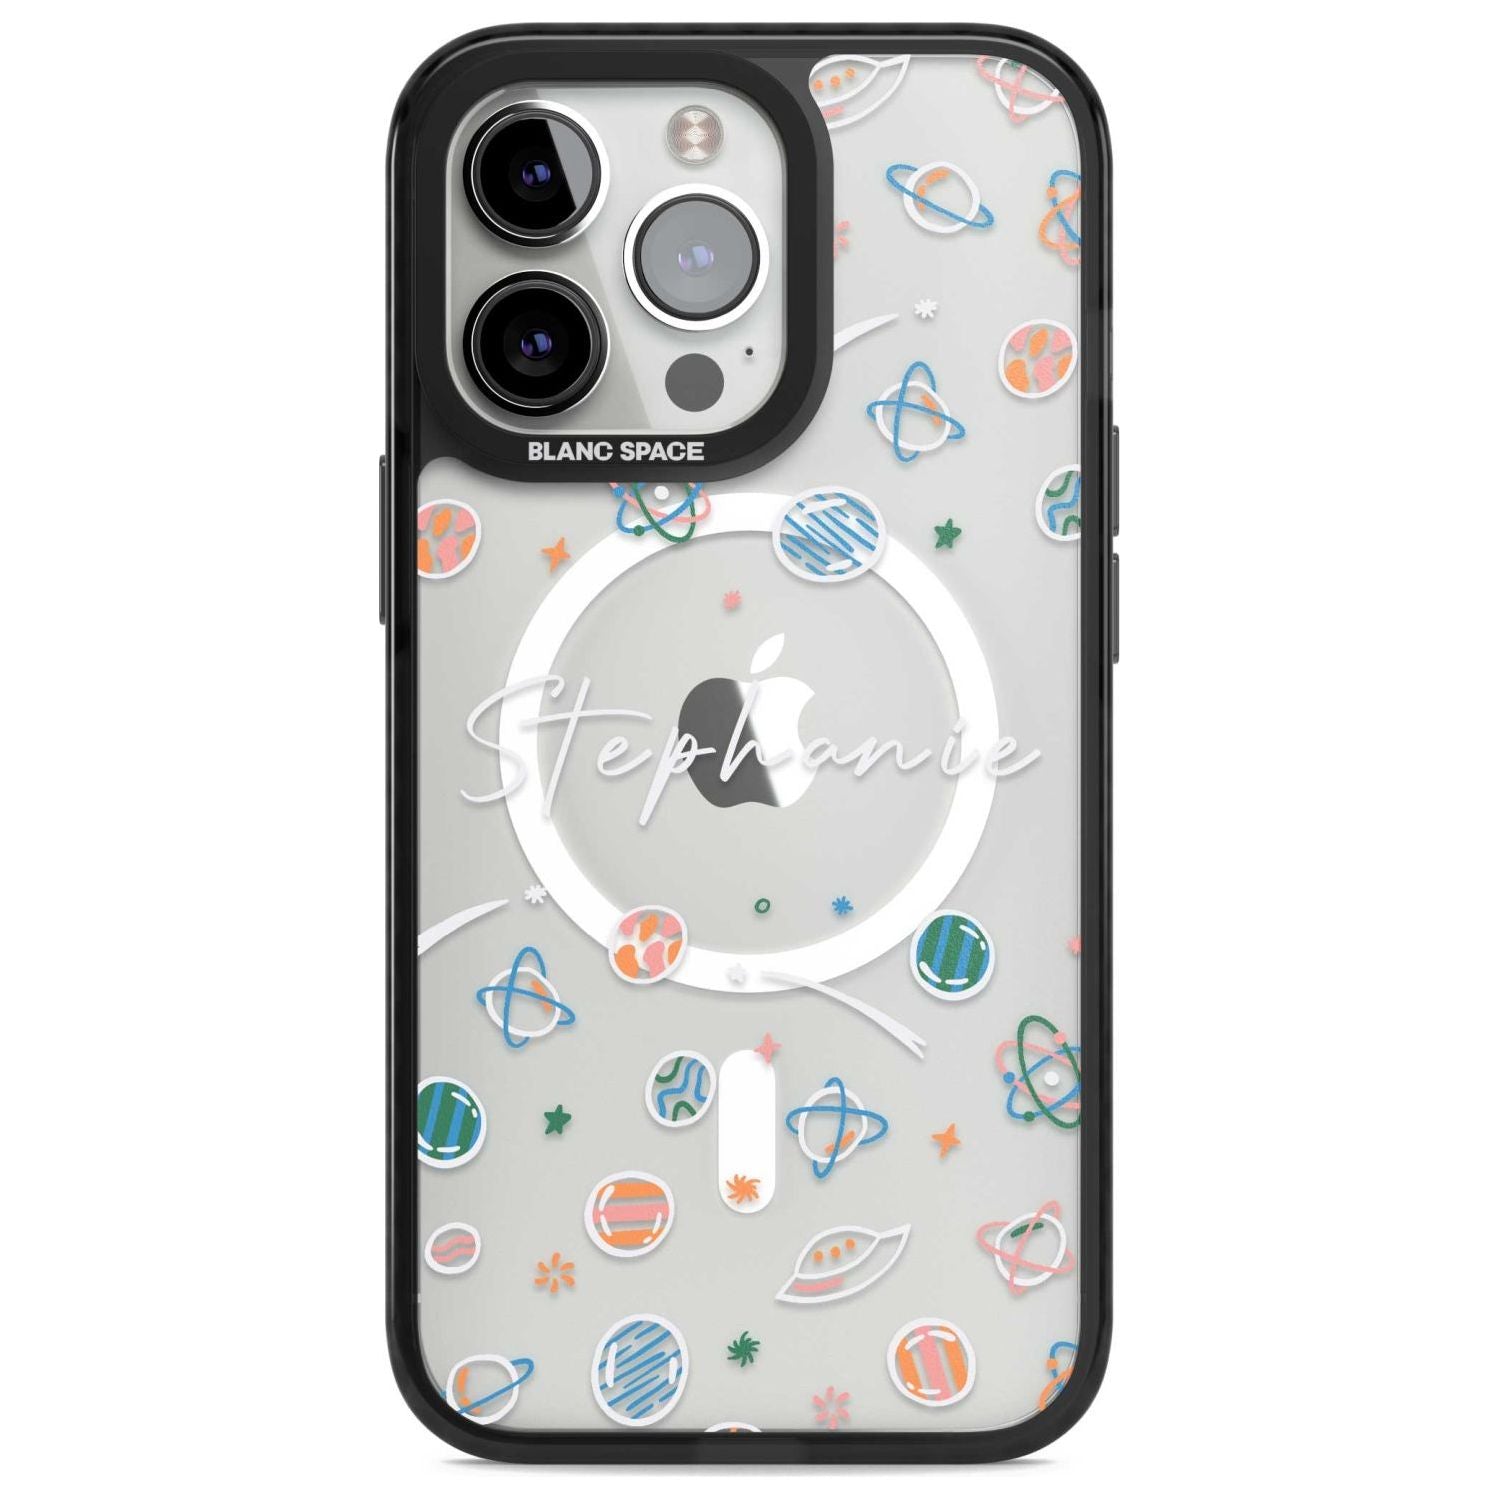 Personalised Space Pattern White Custom Phone Case iPhone 15 Pro Max / Magsafe Black Impact Case,iPhone 15 Pro / Magsafe Black Impact Case,iPhone 14 Pro Max / Magsafe Black Impact Case,iPhone 14 Pro / Magsafe Black Impact Case,iPhone 13 Pro / Magsafe Black Impact Case Blanc Space